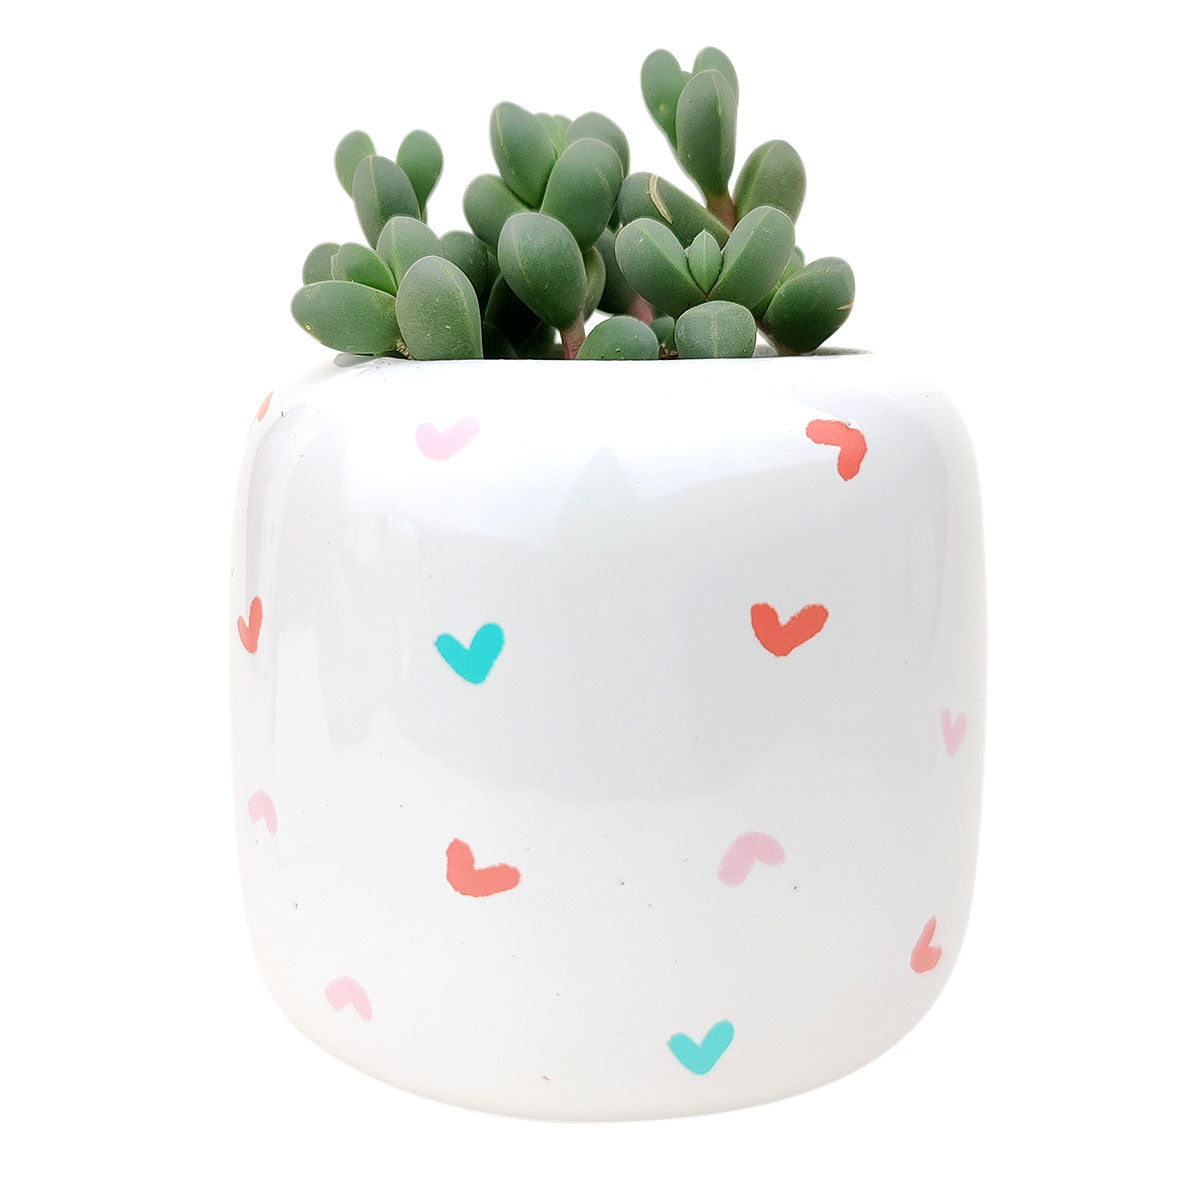 Tiny Heart Pot for sale, Valentines gift ideas, Ceramic pot for succulent and flower, tiny heart vase for home decor